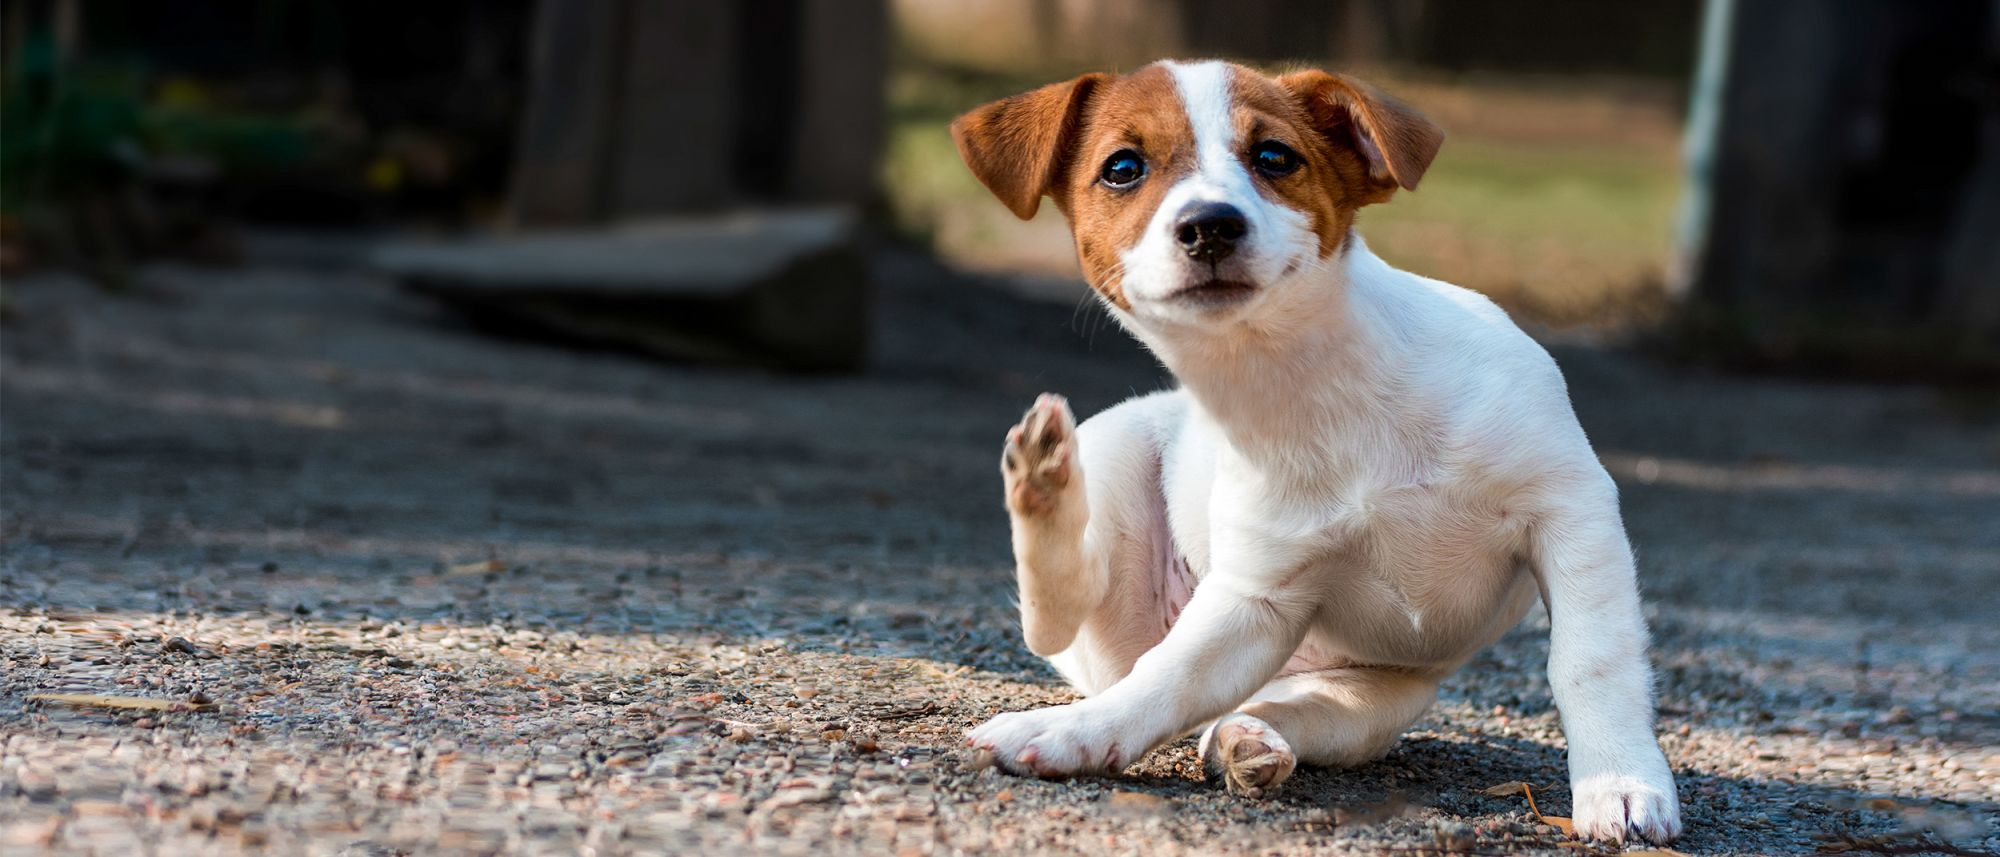 Puppy Jack Russell sitting outdoors scratching itself